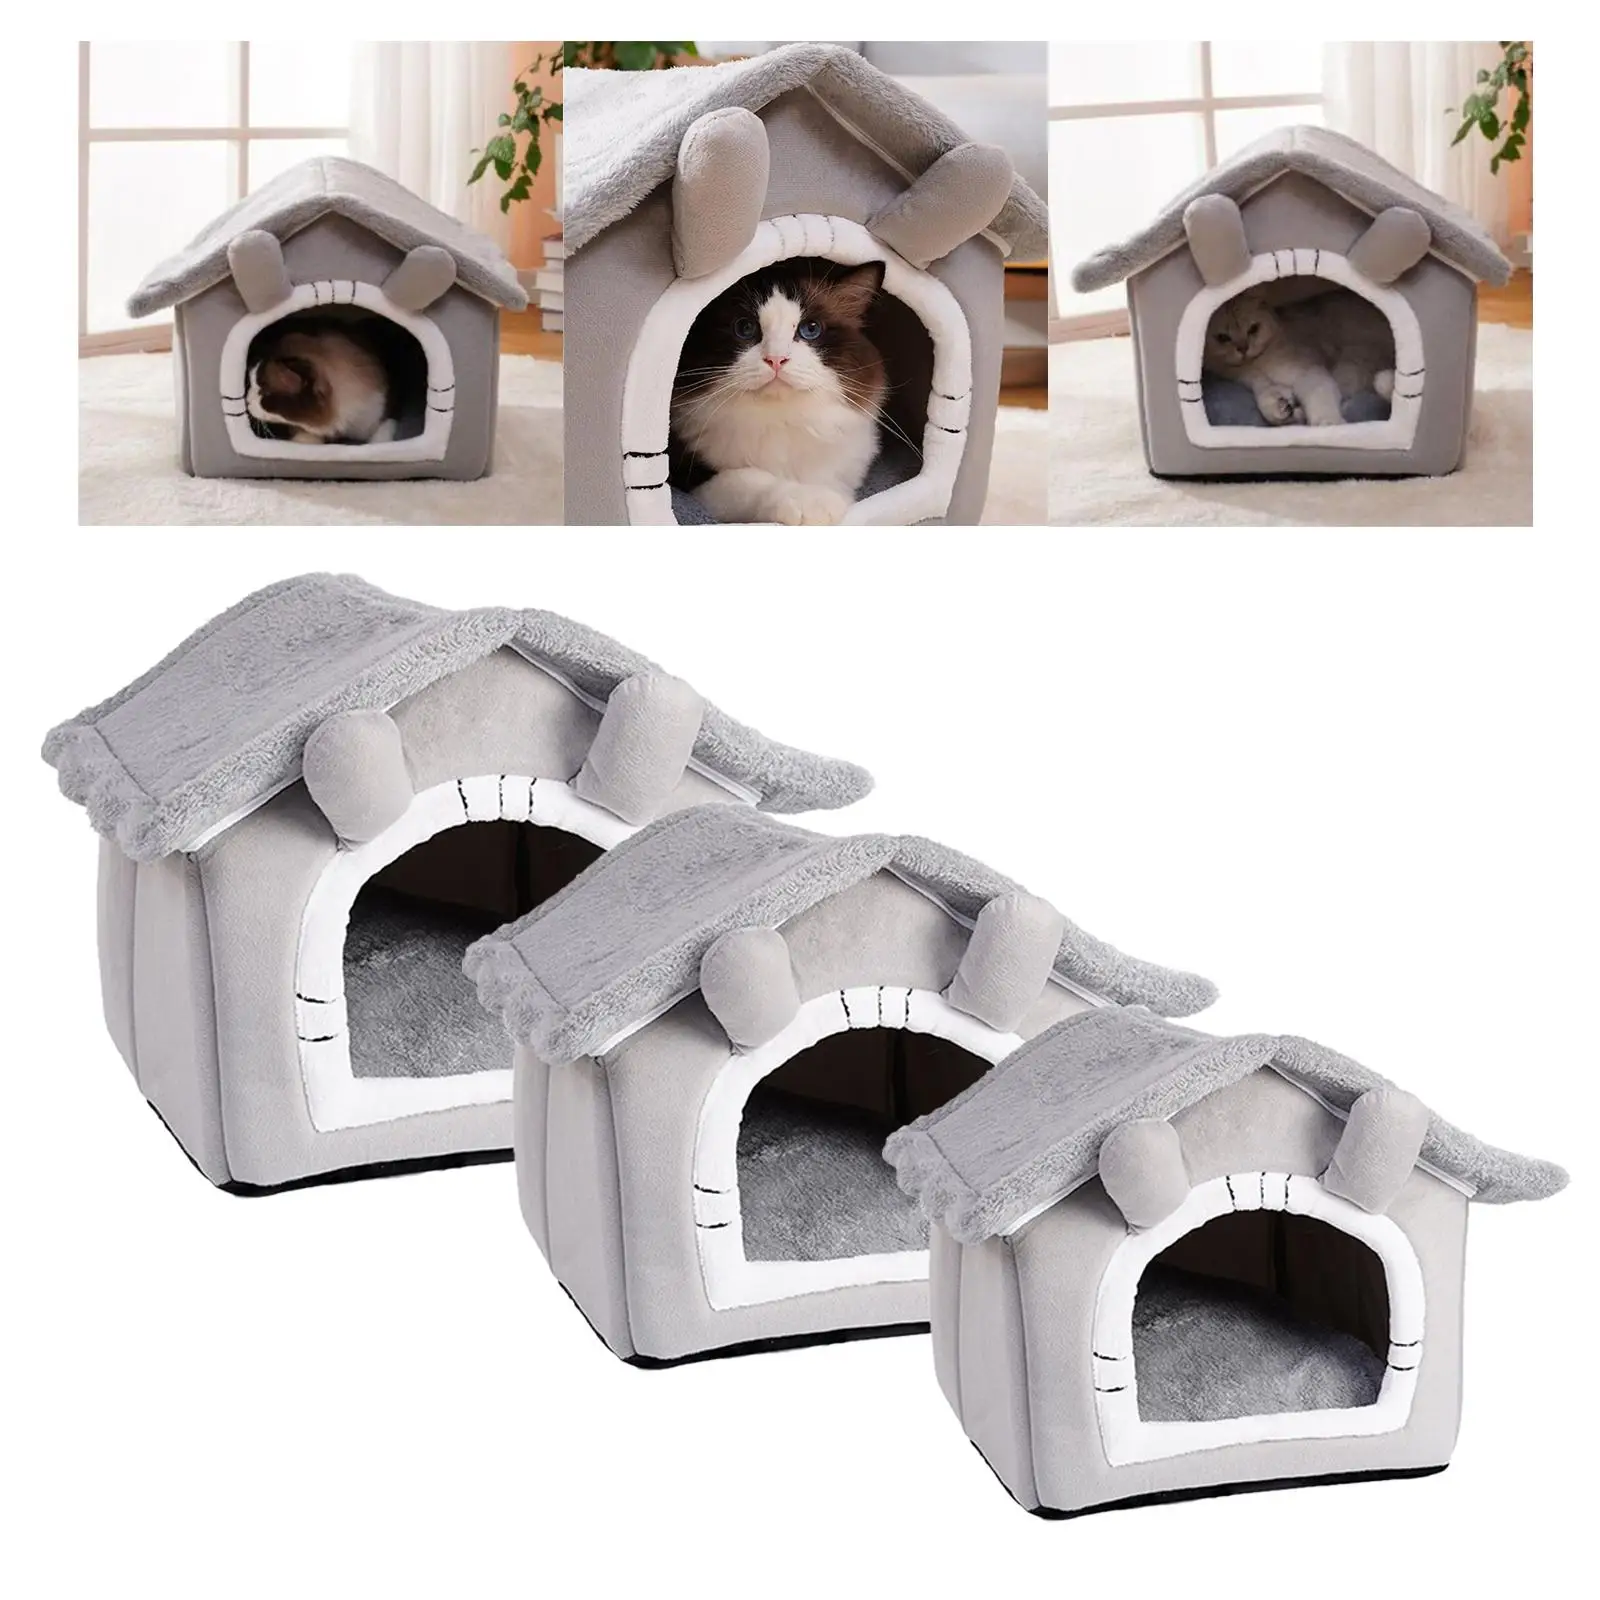 Pet Bed House for Small Medium Large Dogs Cats Winter Warm Cozy Nest Soft